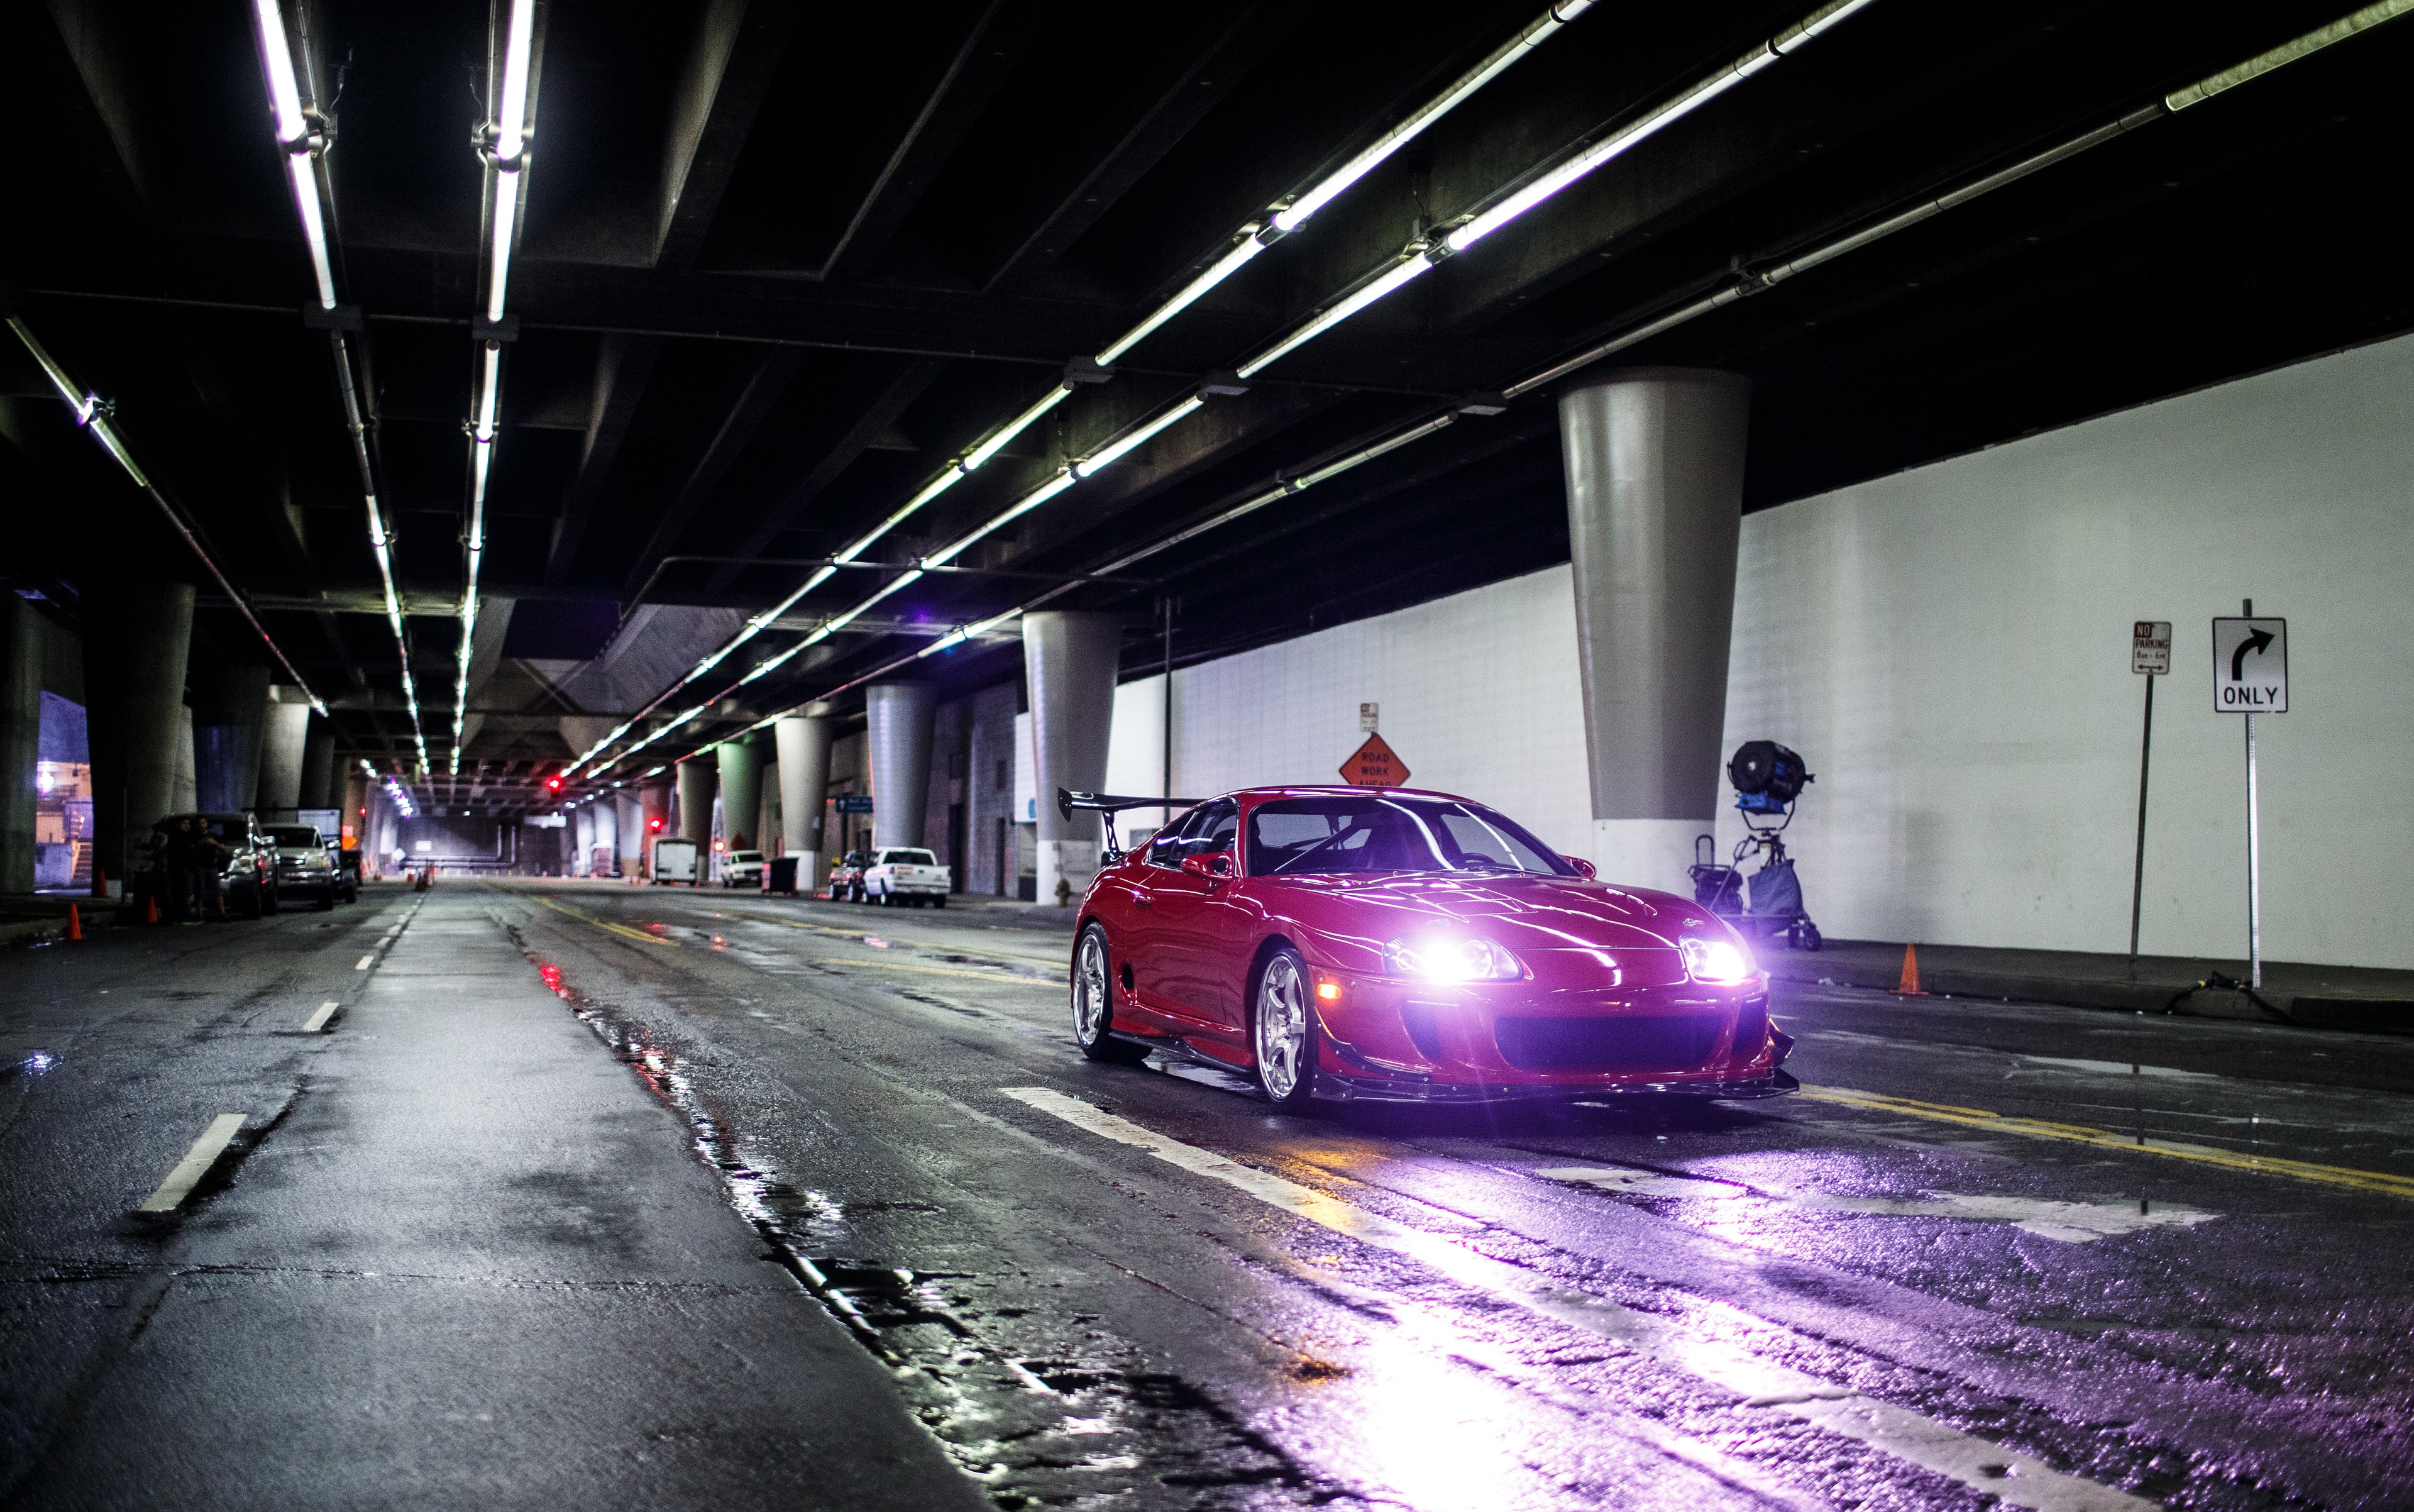 General 3840x2405 Toyota Supra A80 Toyota Supra red cars sports car Japanese cars night city lights Larry Chen